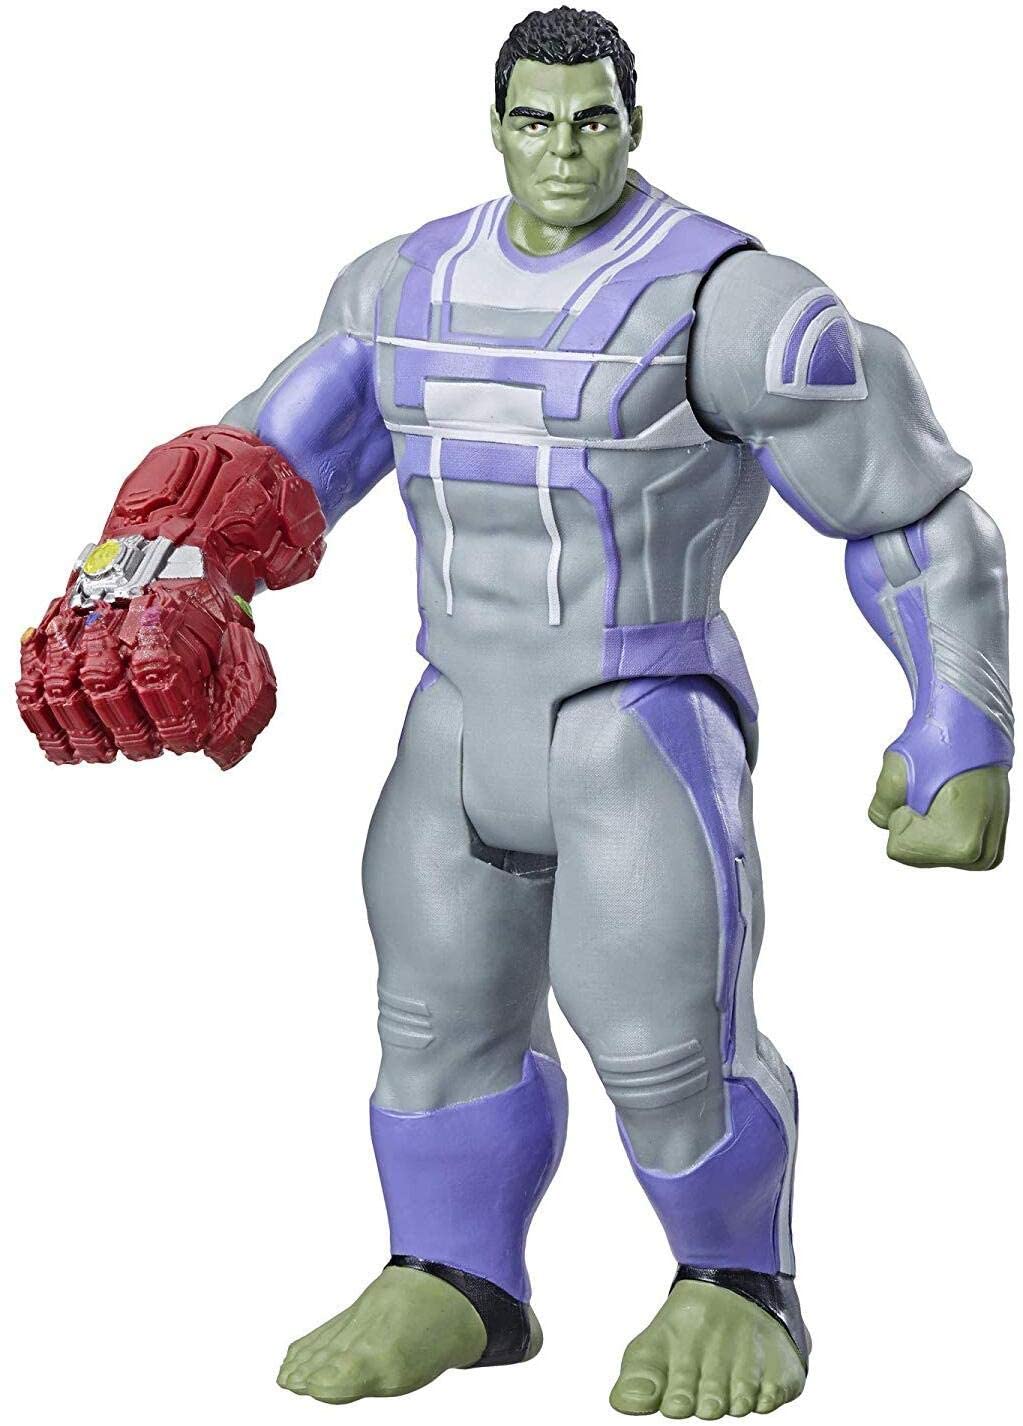 1 Count Hasbro Marvel Hulk 9.5 Inch Action Figure Age 4 Years & Up